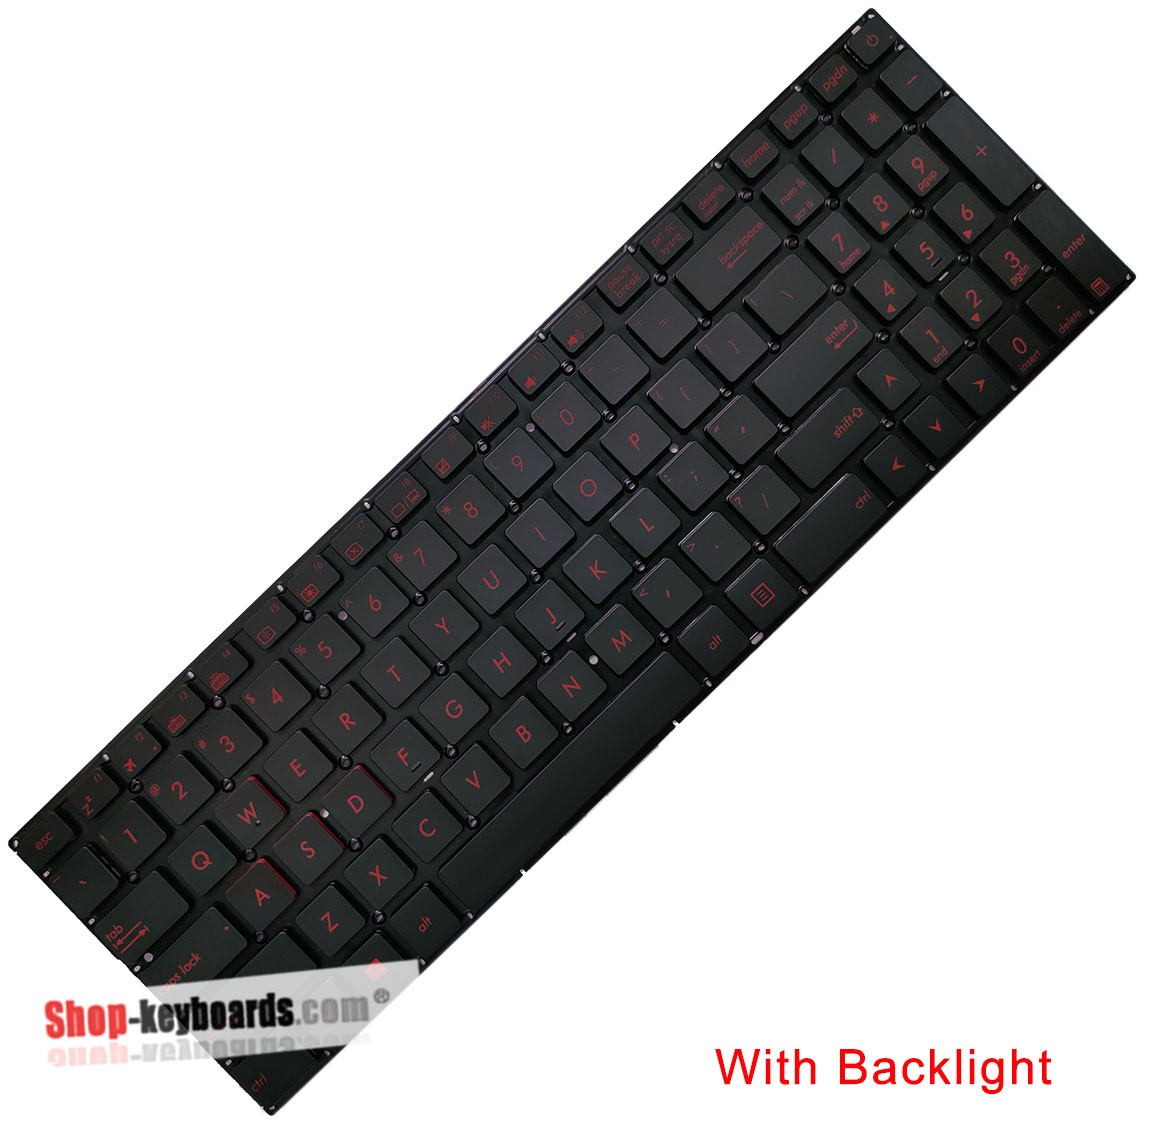 Asus UX501VW-FI252RB  Keyboard replacement